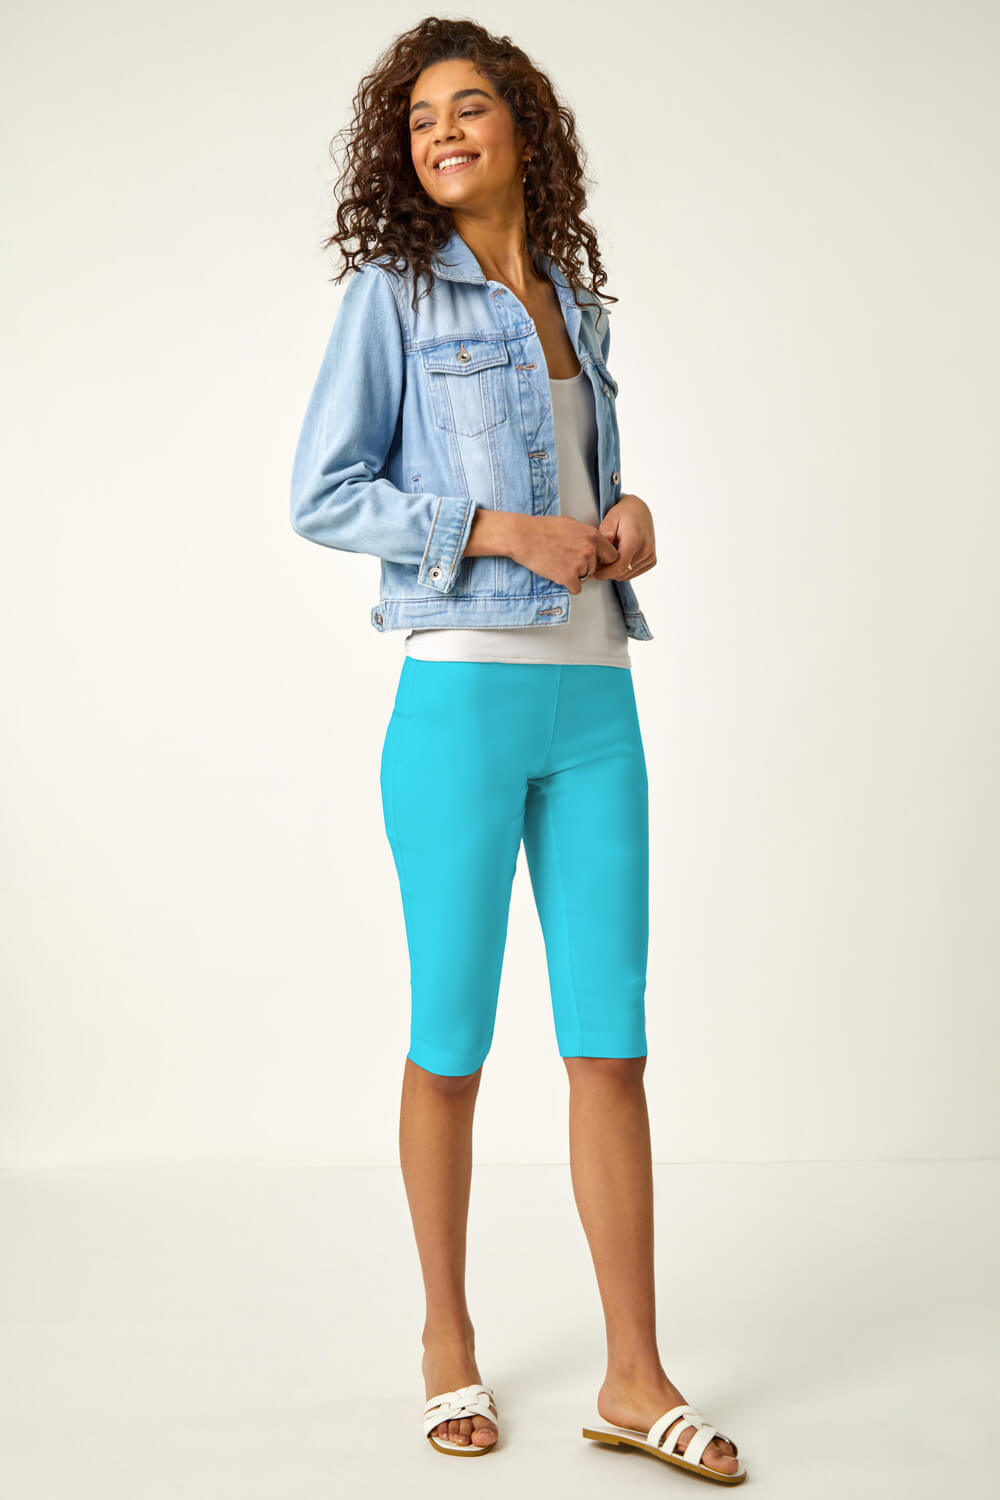 Turquoise Knee Length Stretch Shorts, Image 2 of 6